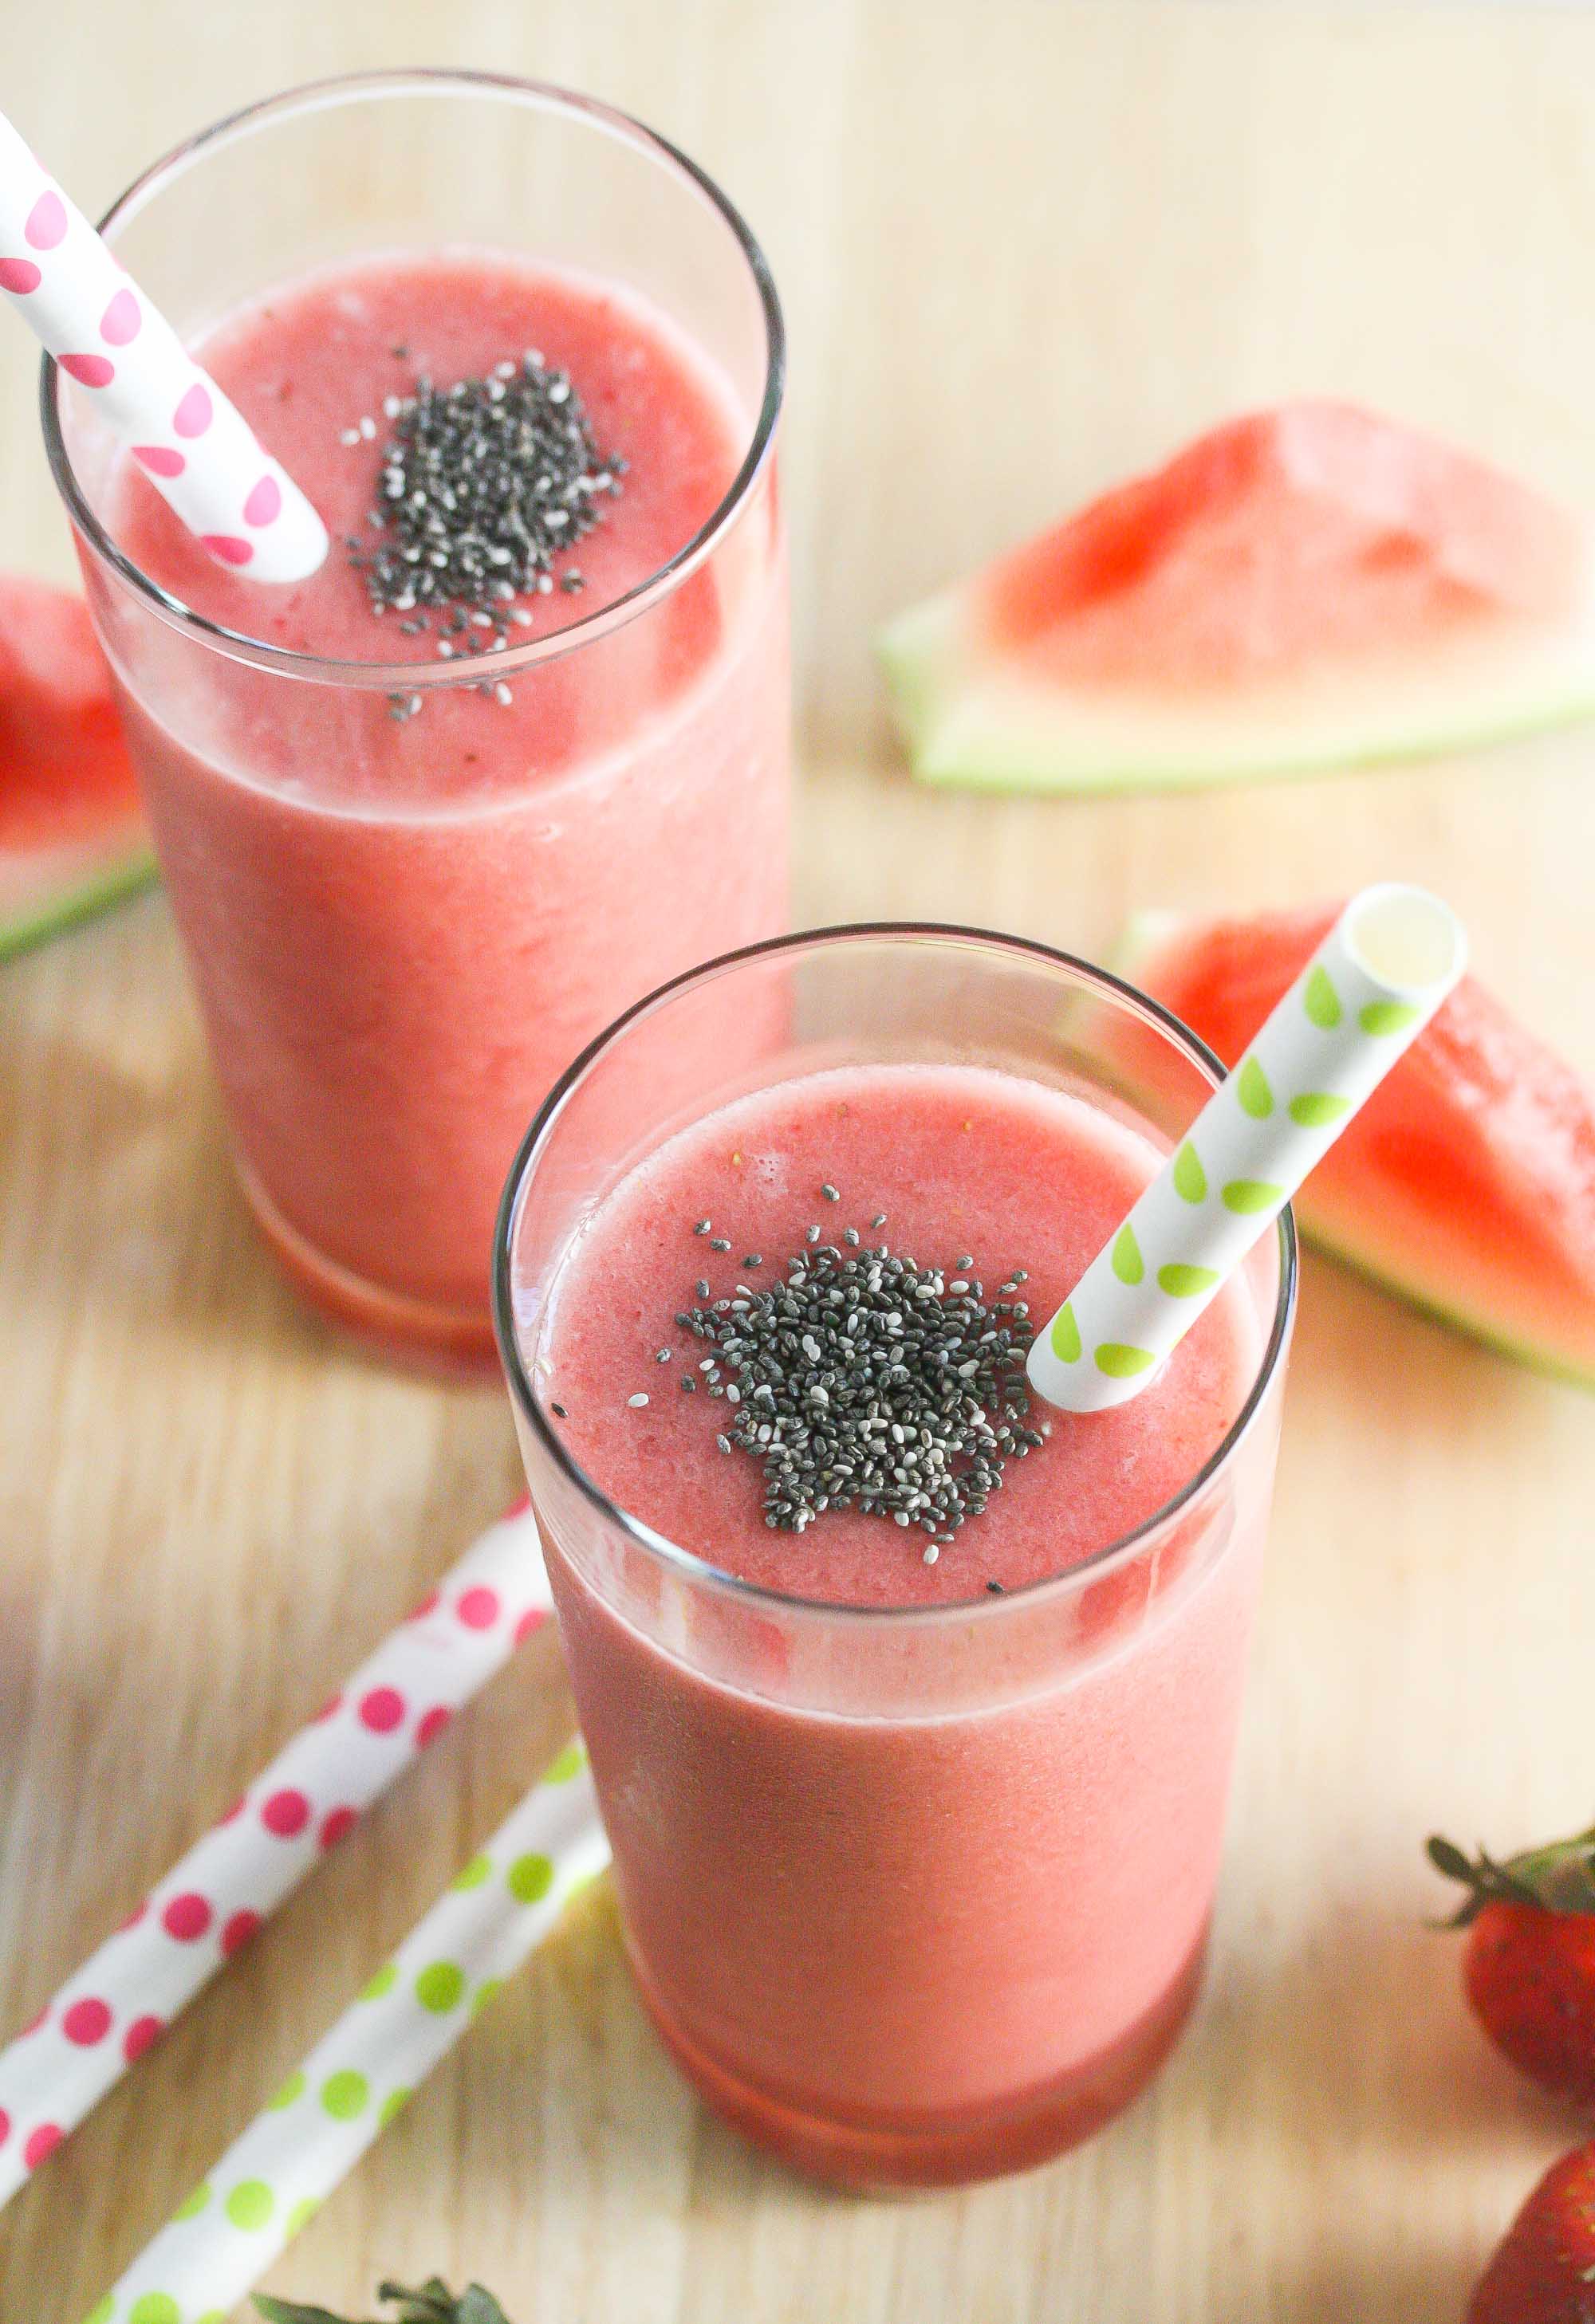 Strawberry Watermelon Smoothie, made with only 3 wholesome ingredients! www.laurenkellynutrition.com